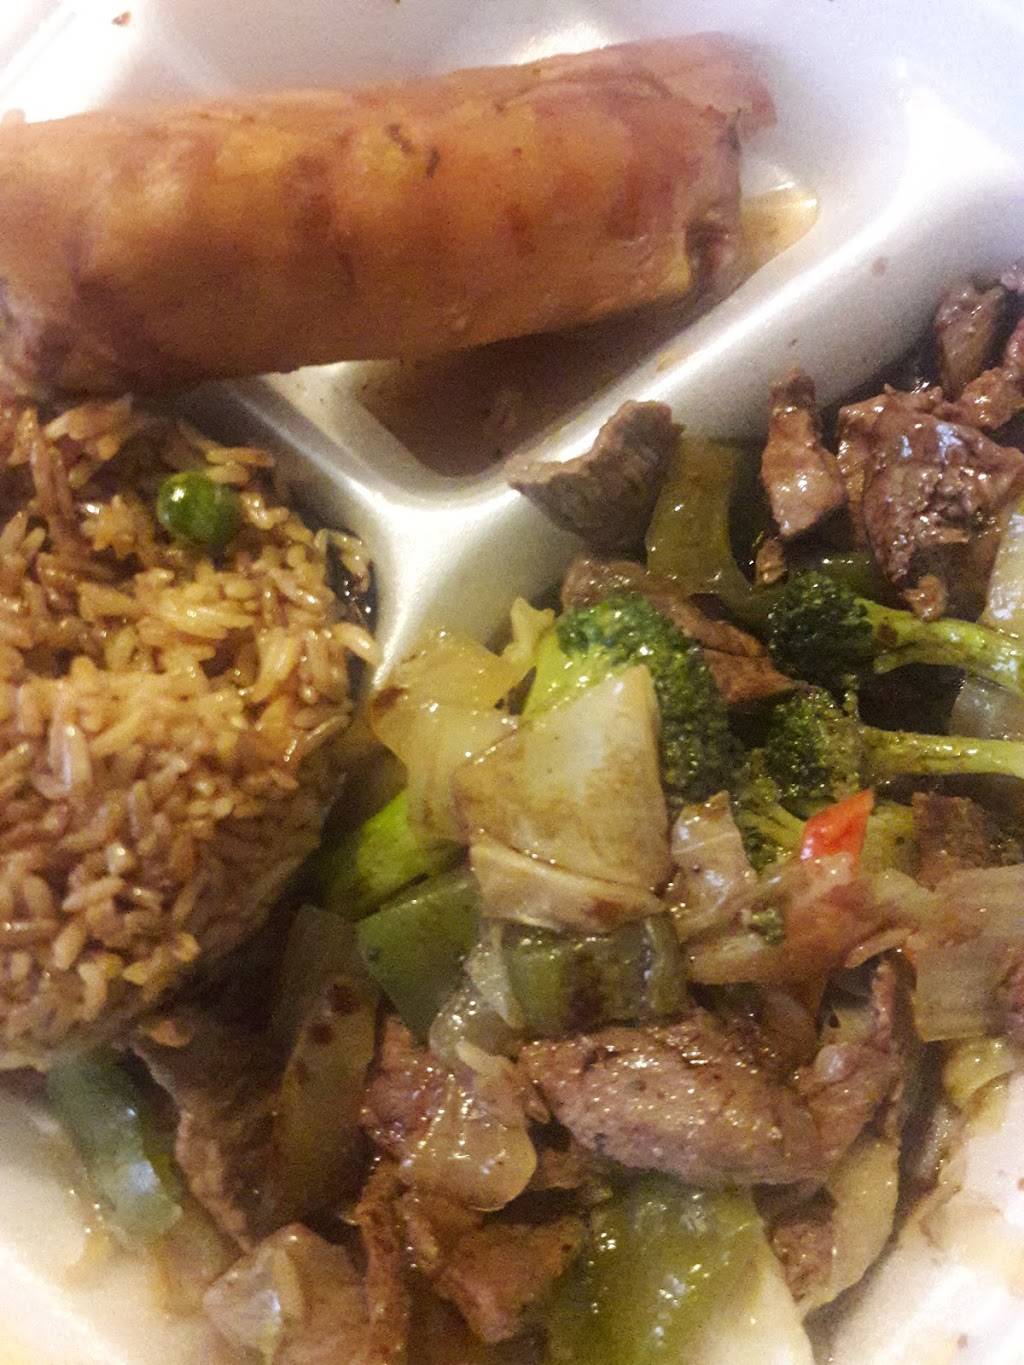 Philippine Connection Carry Out Food | meal takeaway | 3225 E Magnolia Ave, Knoxville, TN 37914, USA | 8655225276 OR +1 865-522-5276